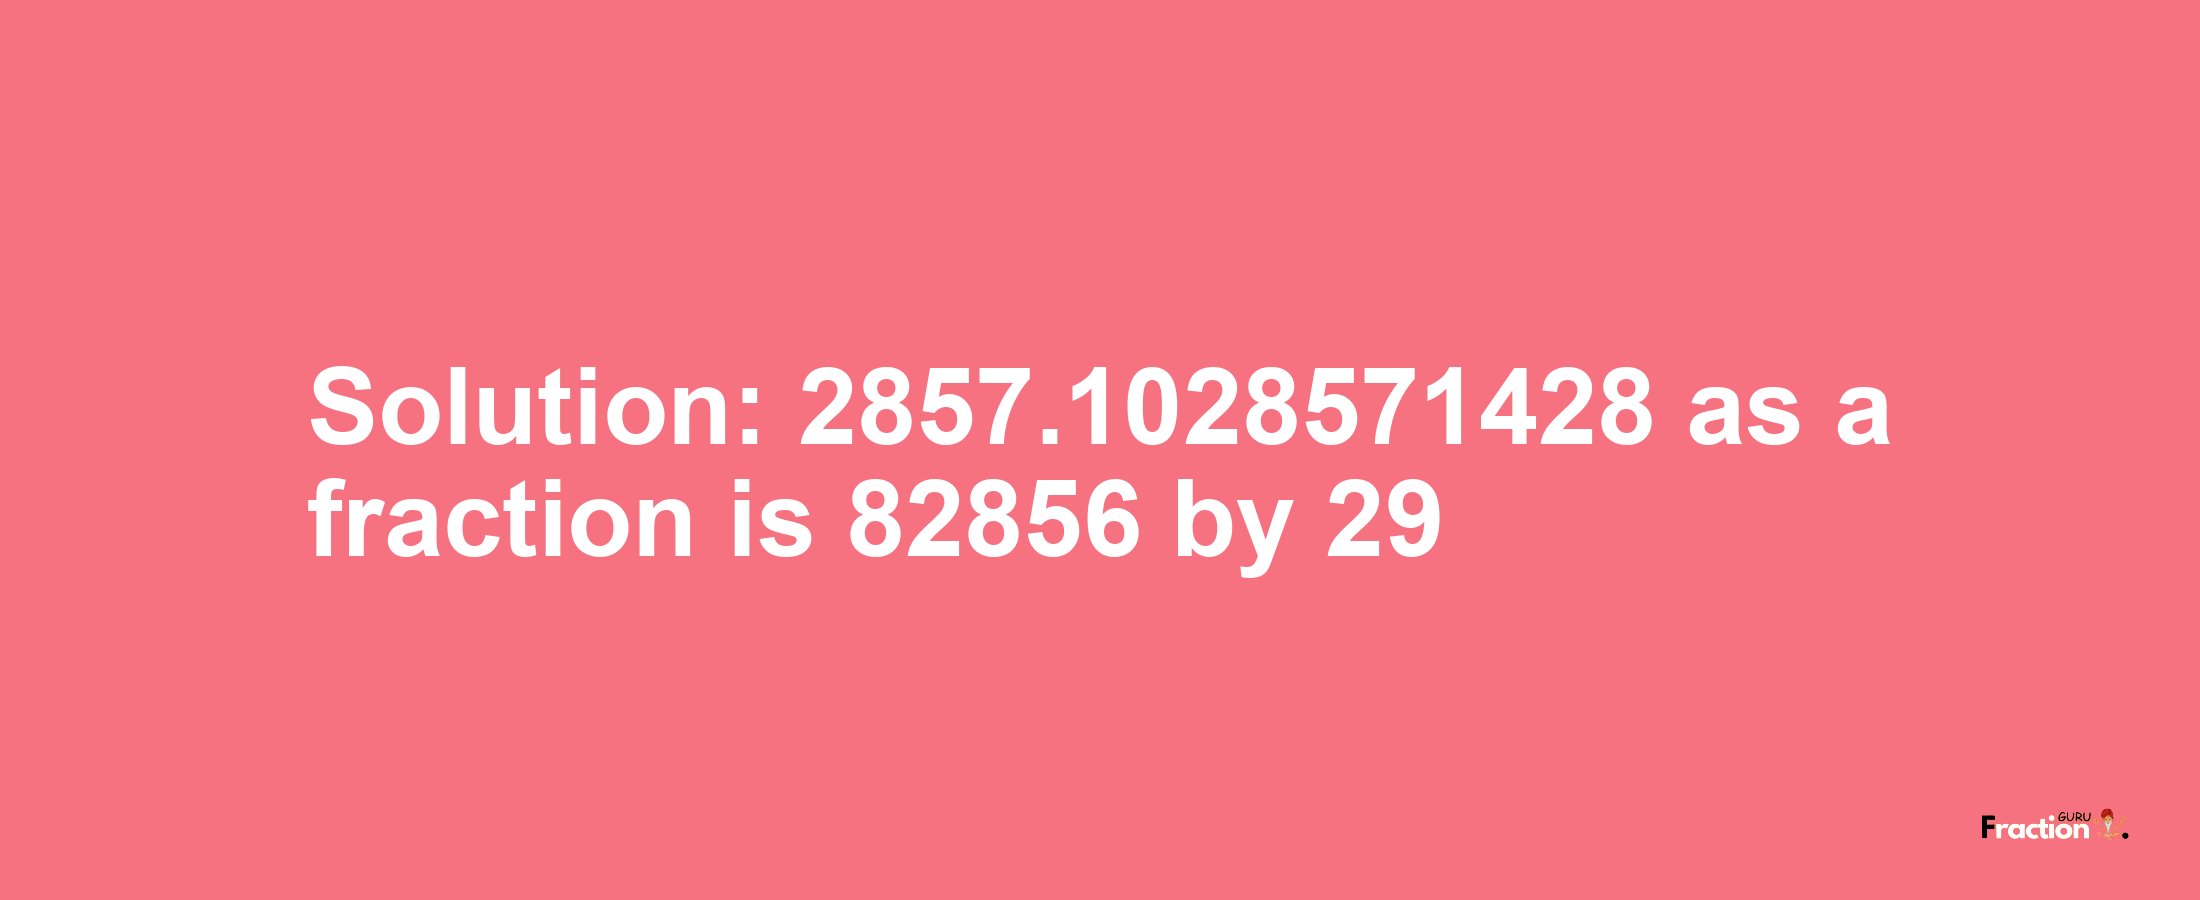 Solution:2857.1028571428 as a fraction is 82856/29